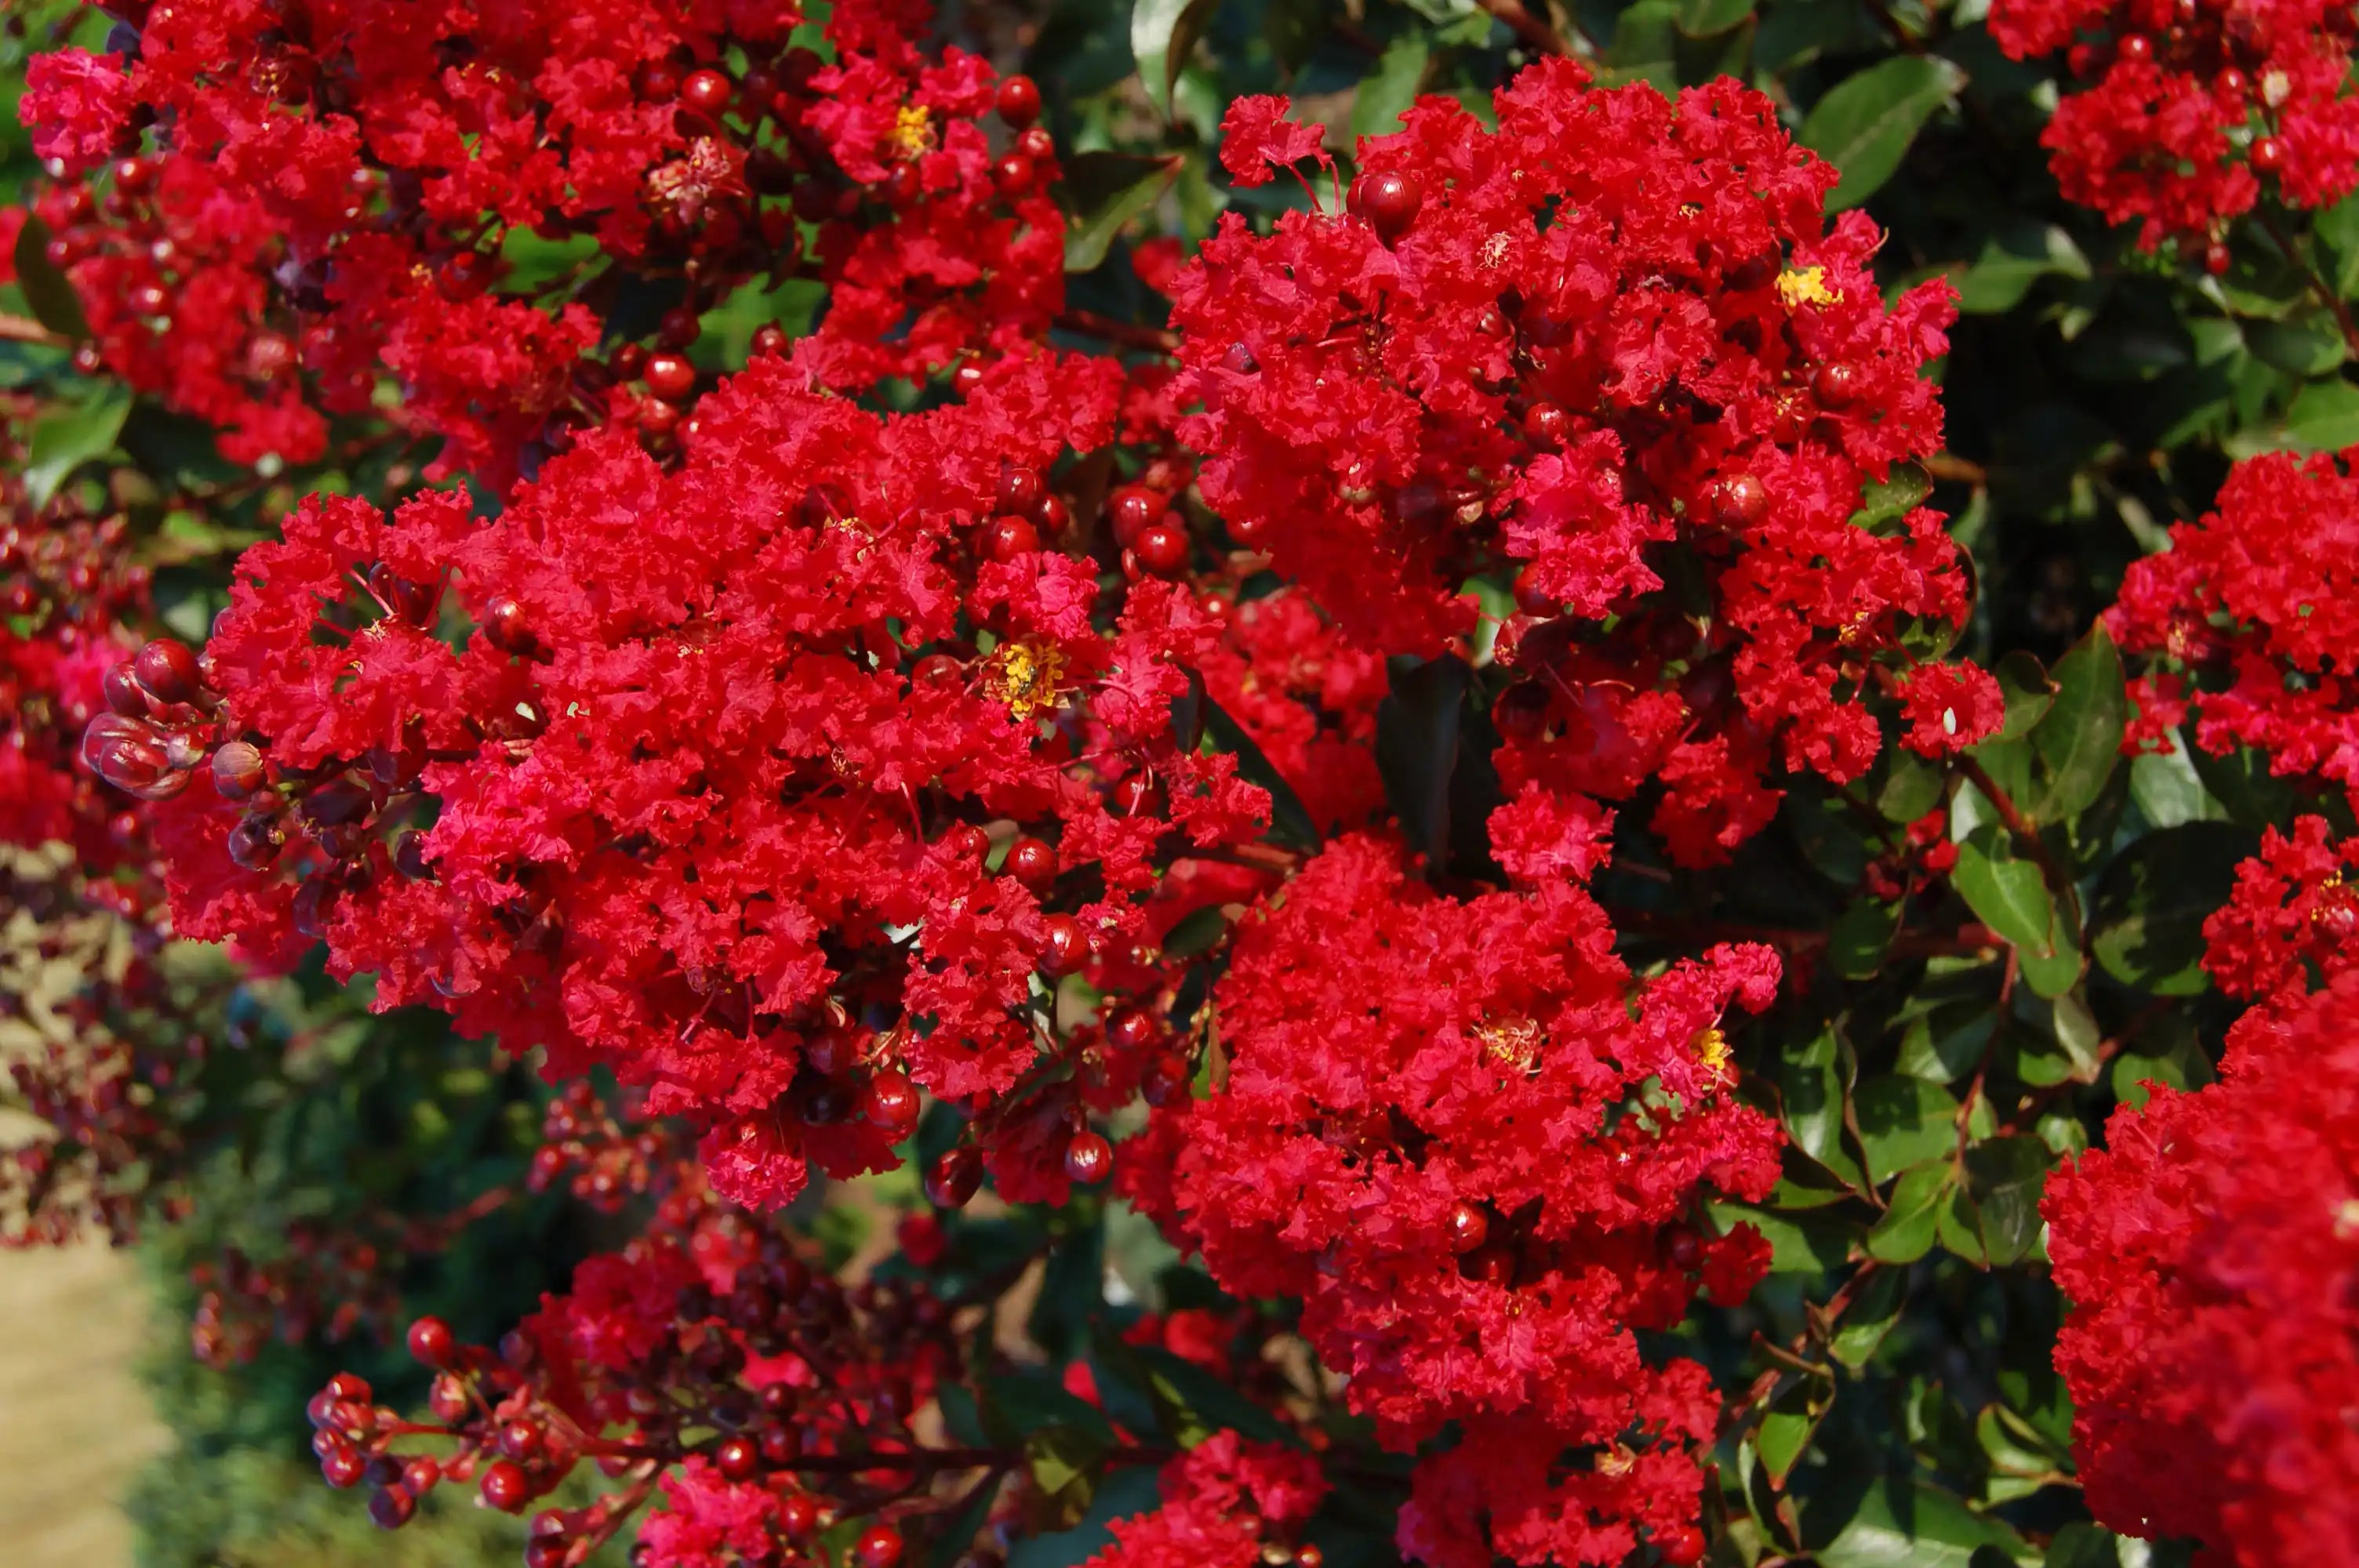 This Red Rooster® Crepe Myrtle presents a wall of breathtaking red-colored flowers and dark green foliage. These bushes are heavy with buds just waiting to replace the mature flowers.